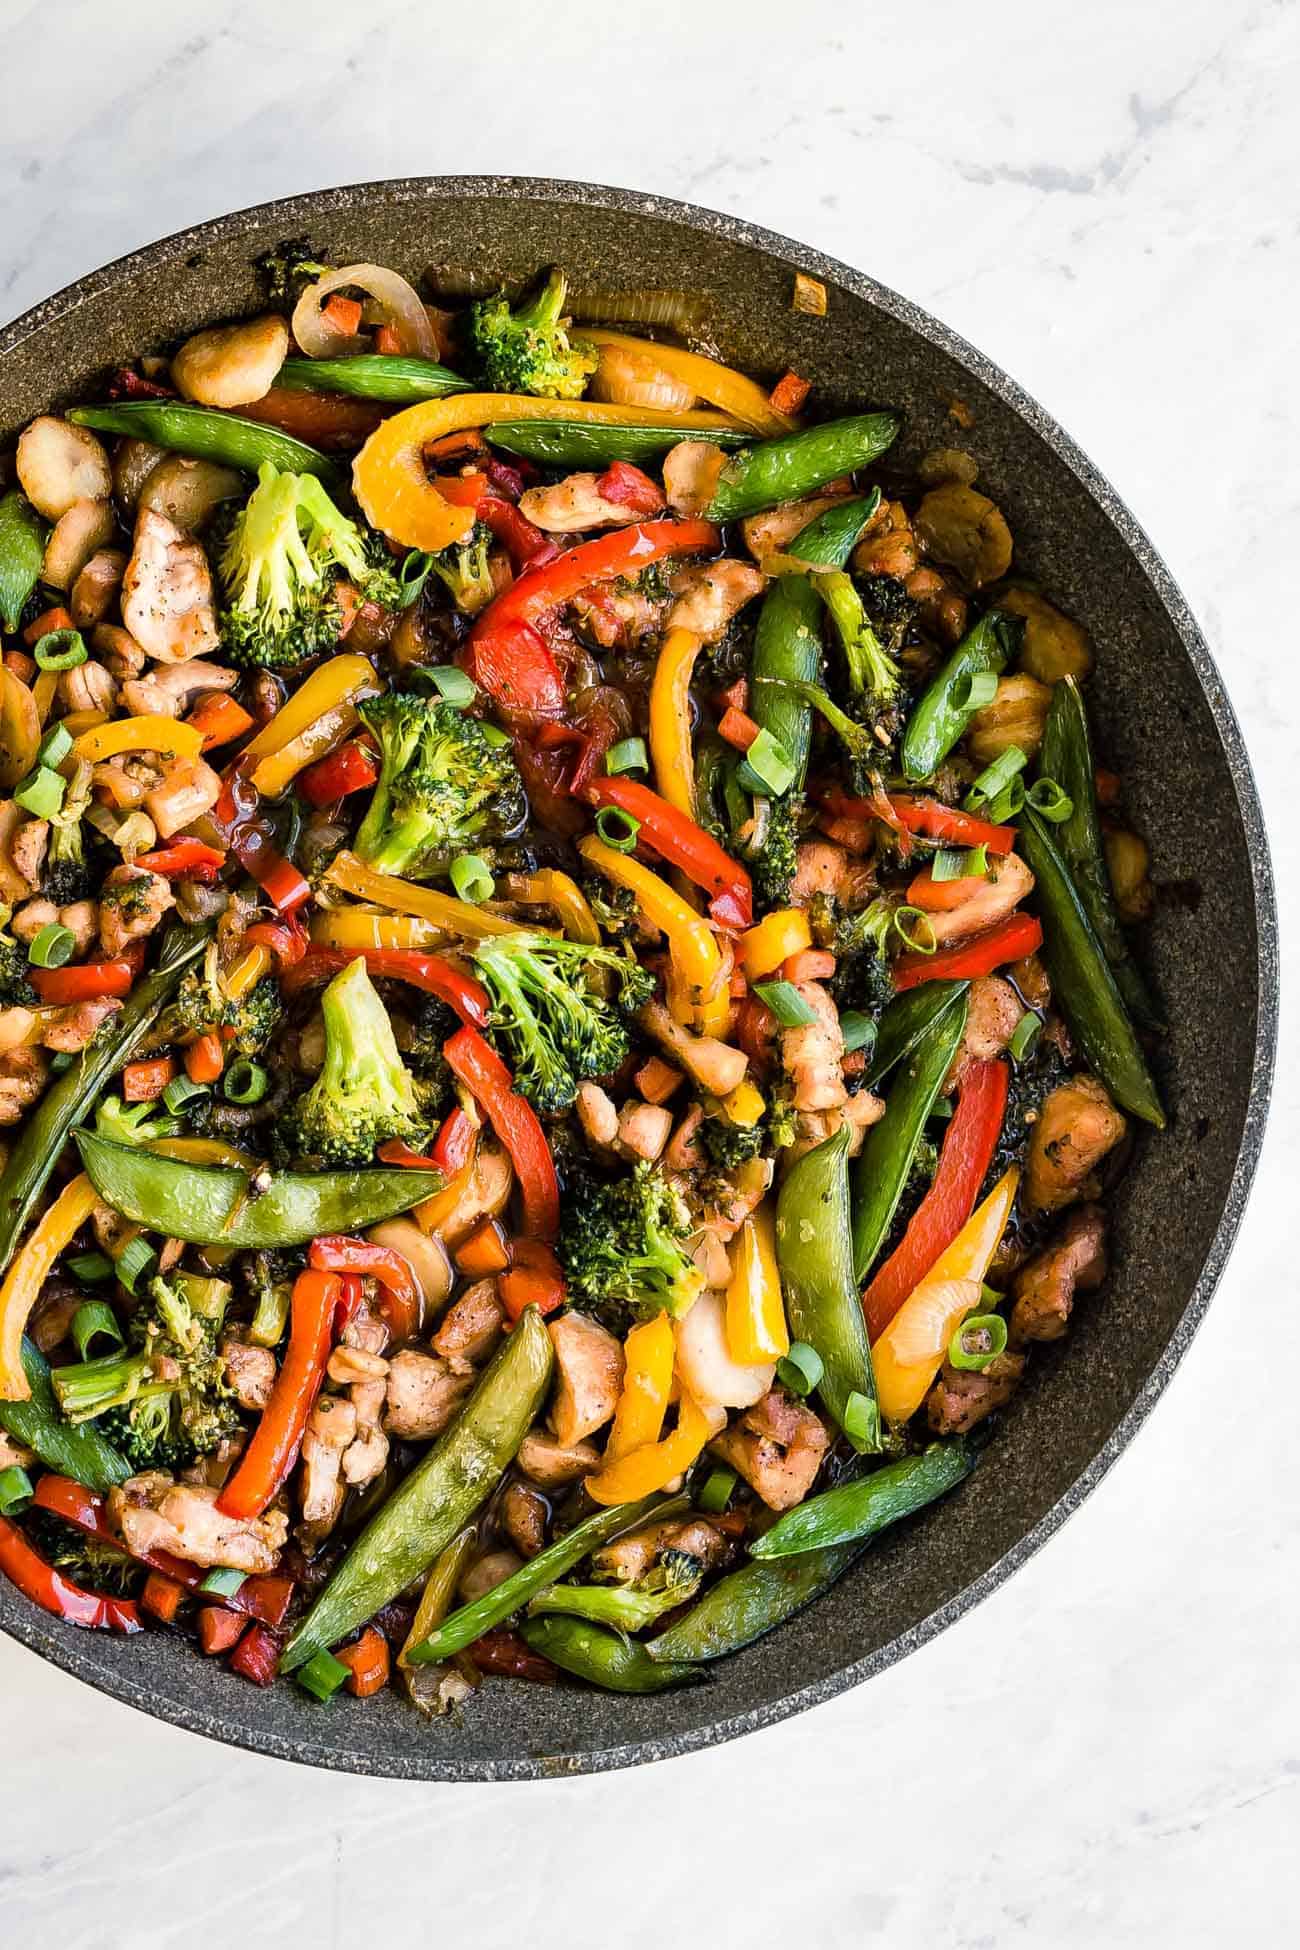 keto chicken stir fry in a saute pan with peppers, broccoli, carrots and snap peas